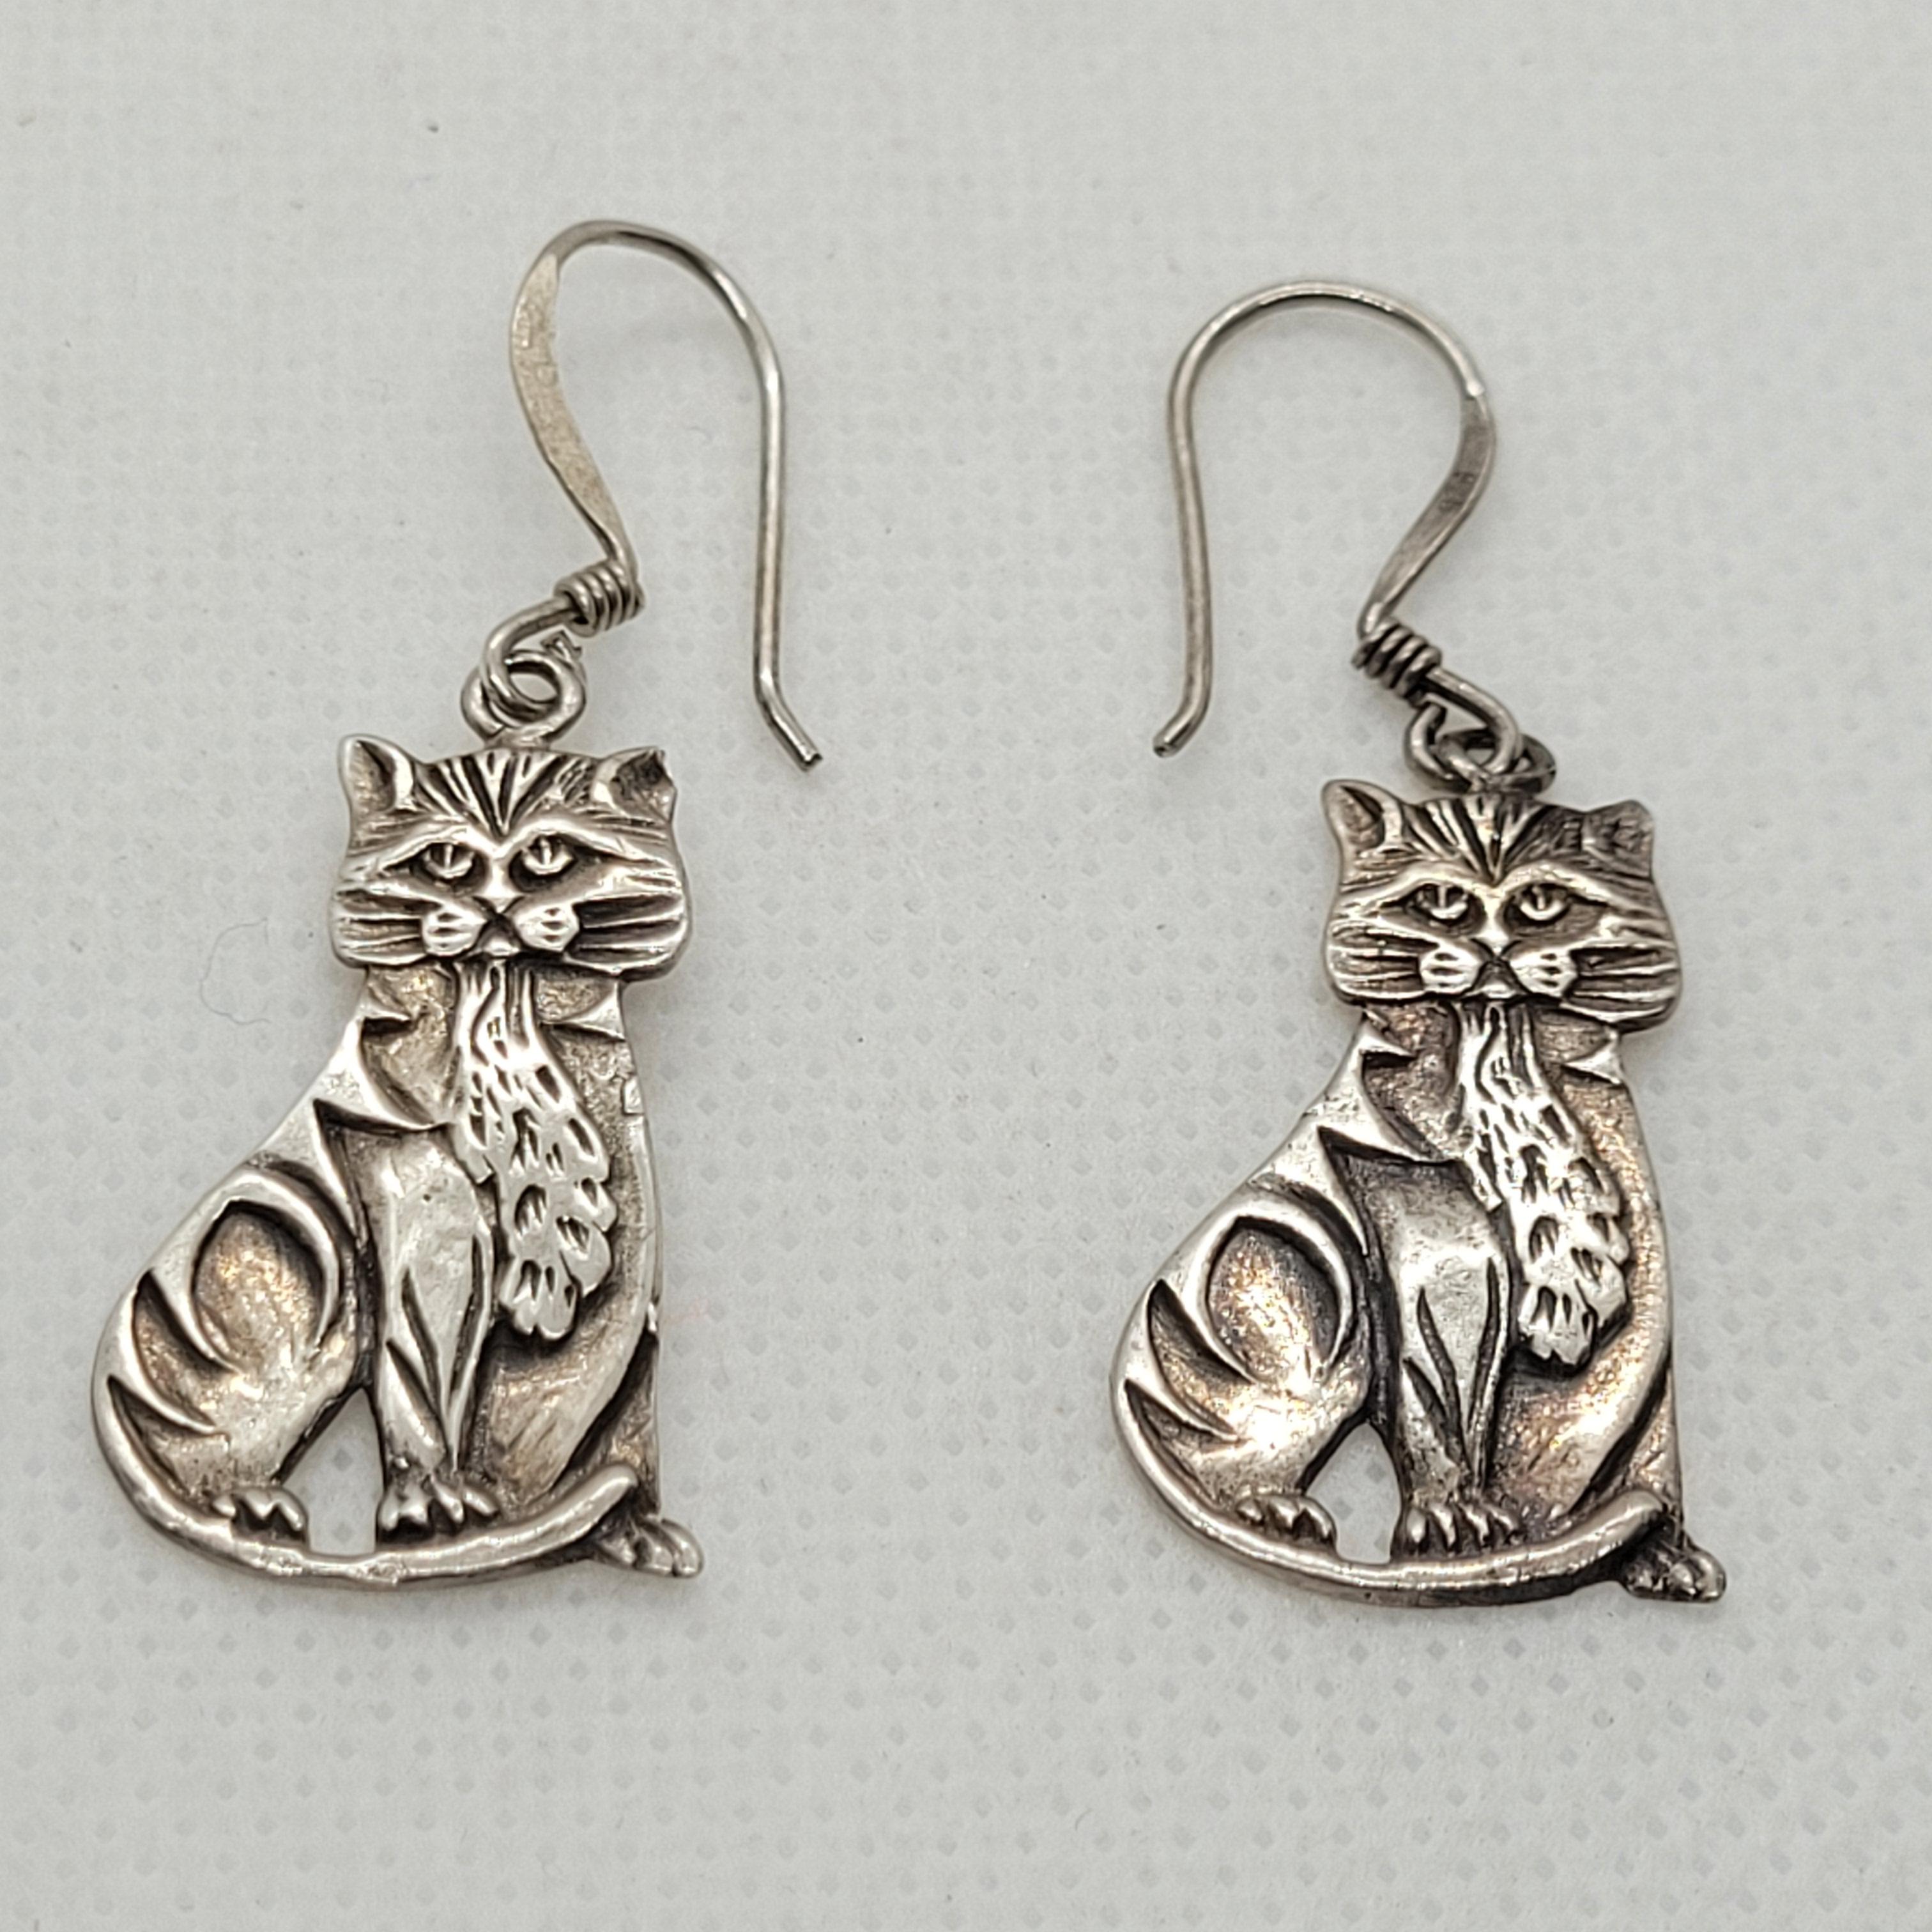 These stunning Silver Cat Hook Earrings are a must-have for any feline enthusiast! Expertly crafted with a stamped 925 mark, they offer a total length of 25mm and a width of 10-15mm, making them the perfect size for everyday wear. Weighing in at 4.5